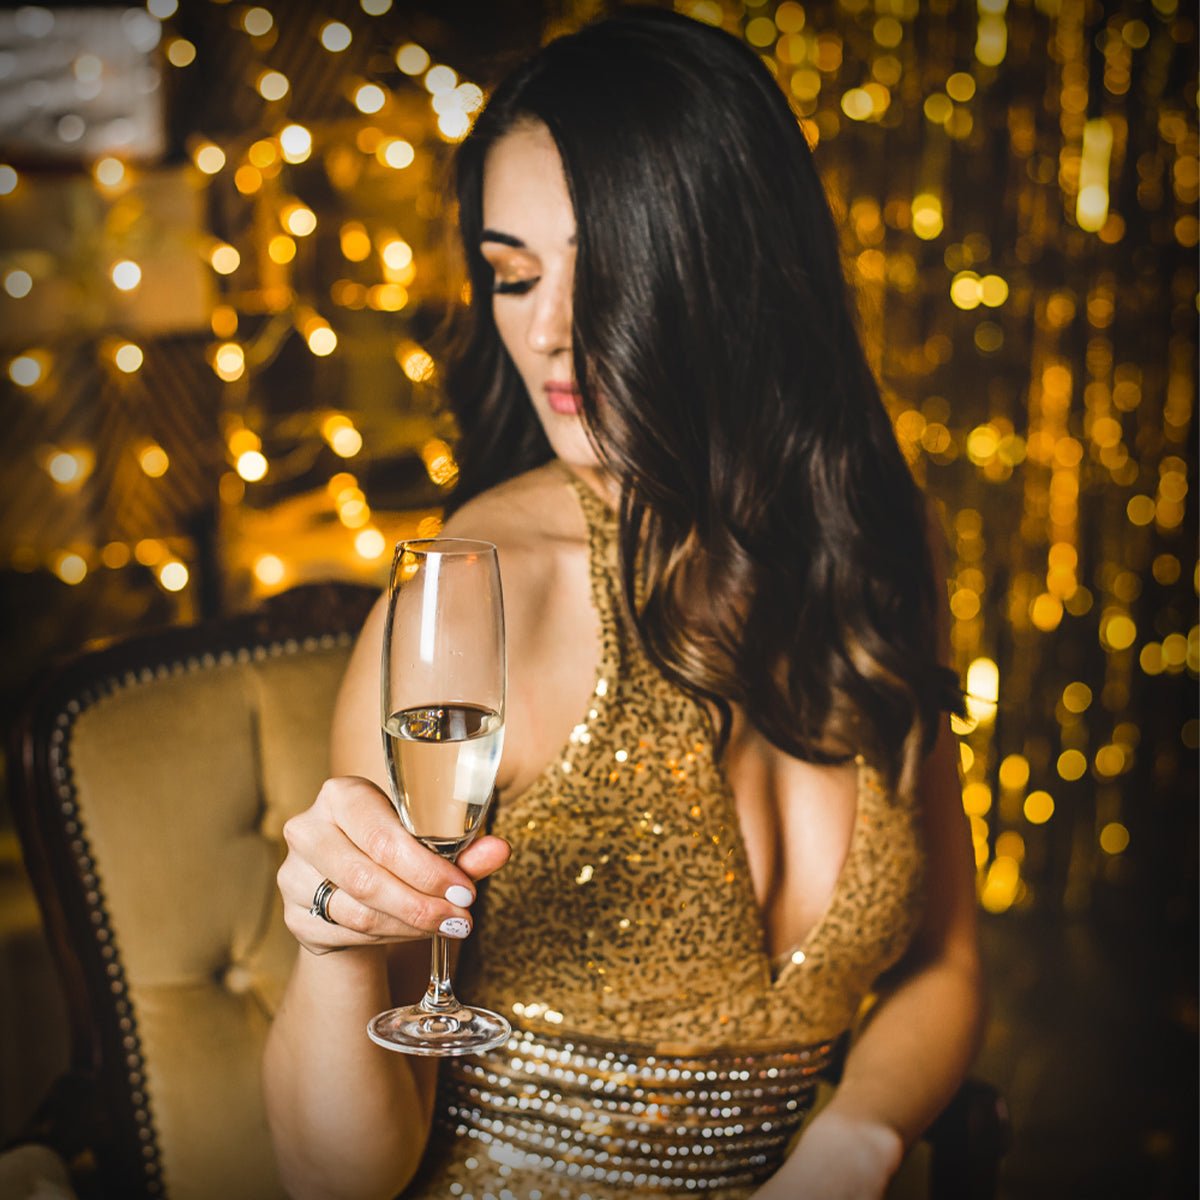 Women Holding a Glass Of Champagne In Gold